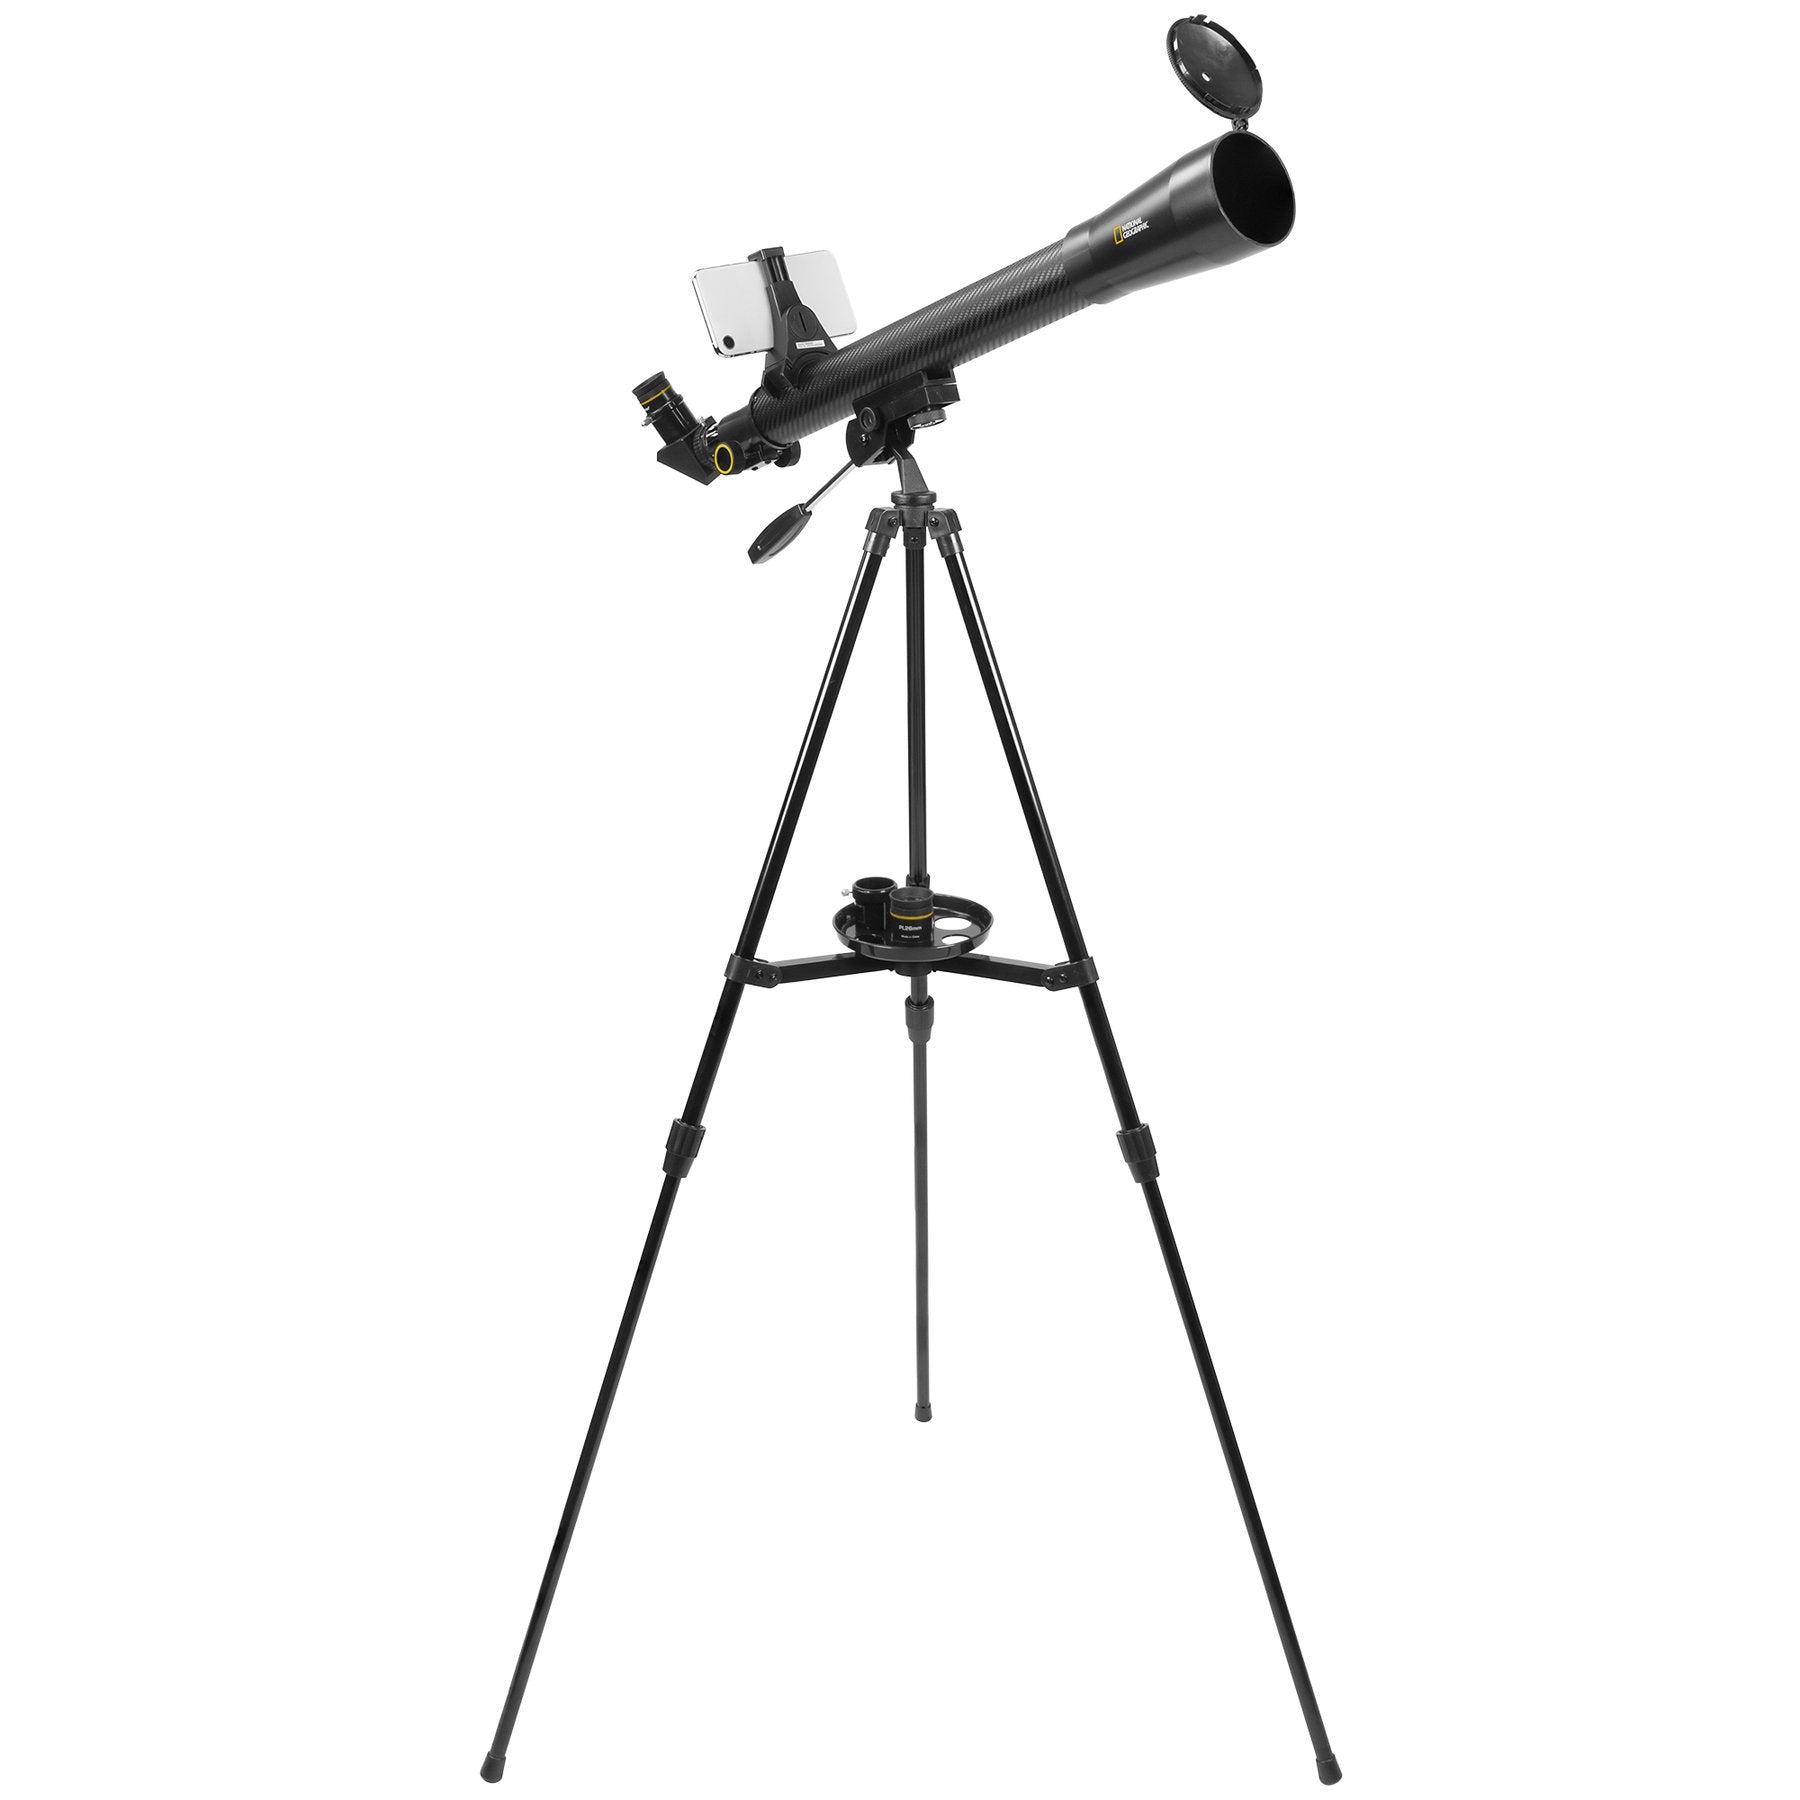 Beginner Telescope to See Planets - National Geographic - 4